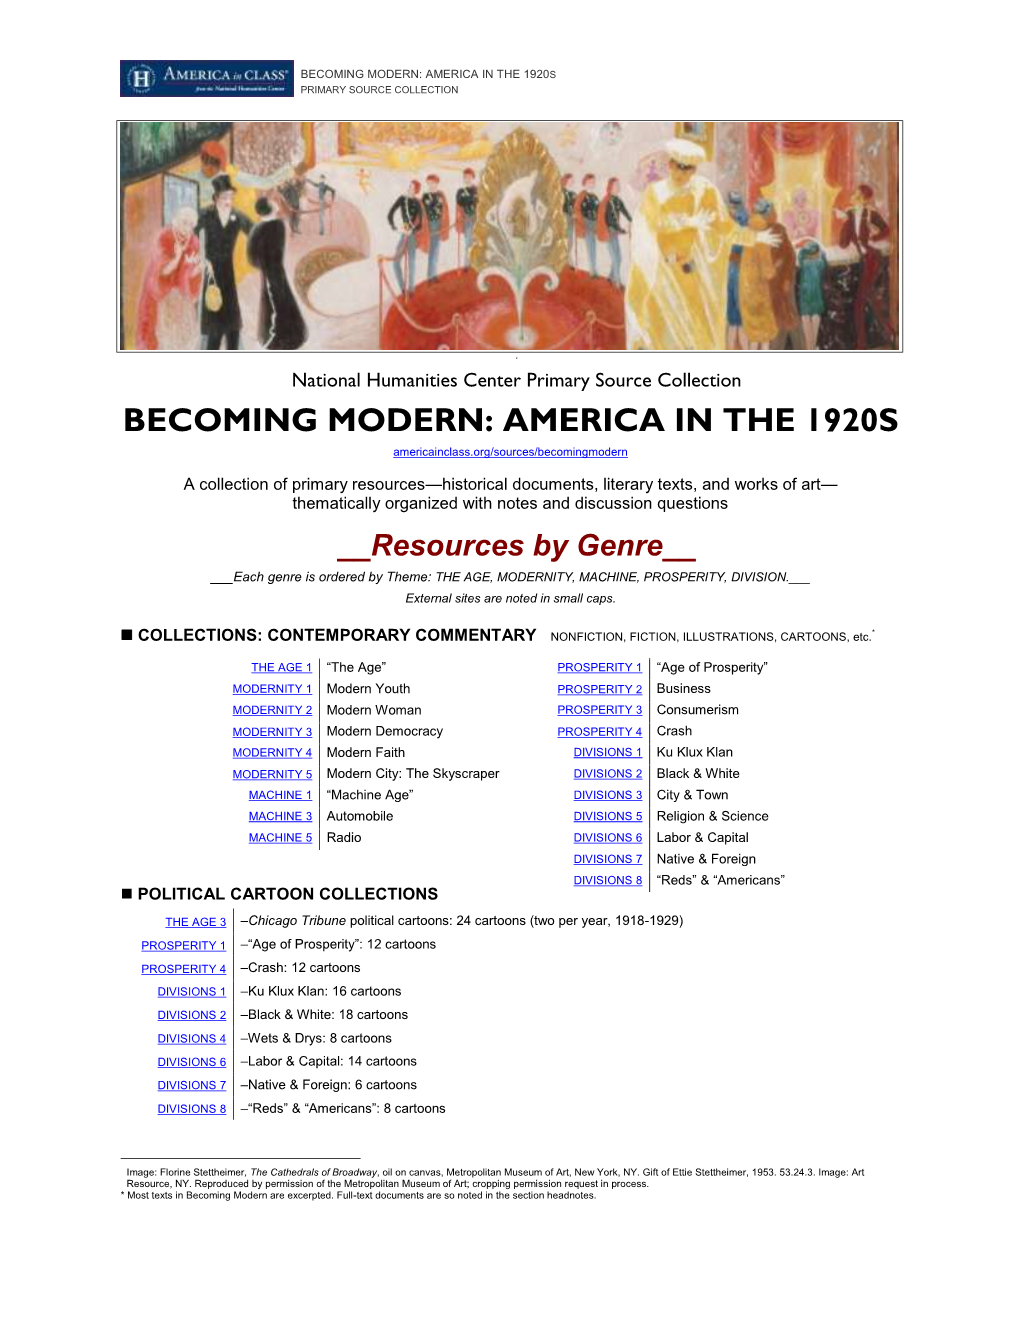 All Texts by Genre, Becoming Modern: America in the 1920S